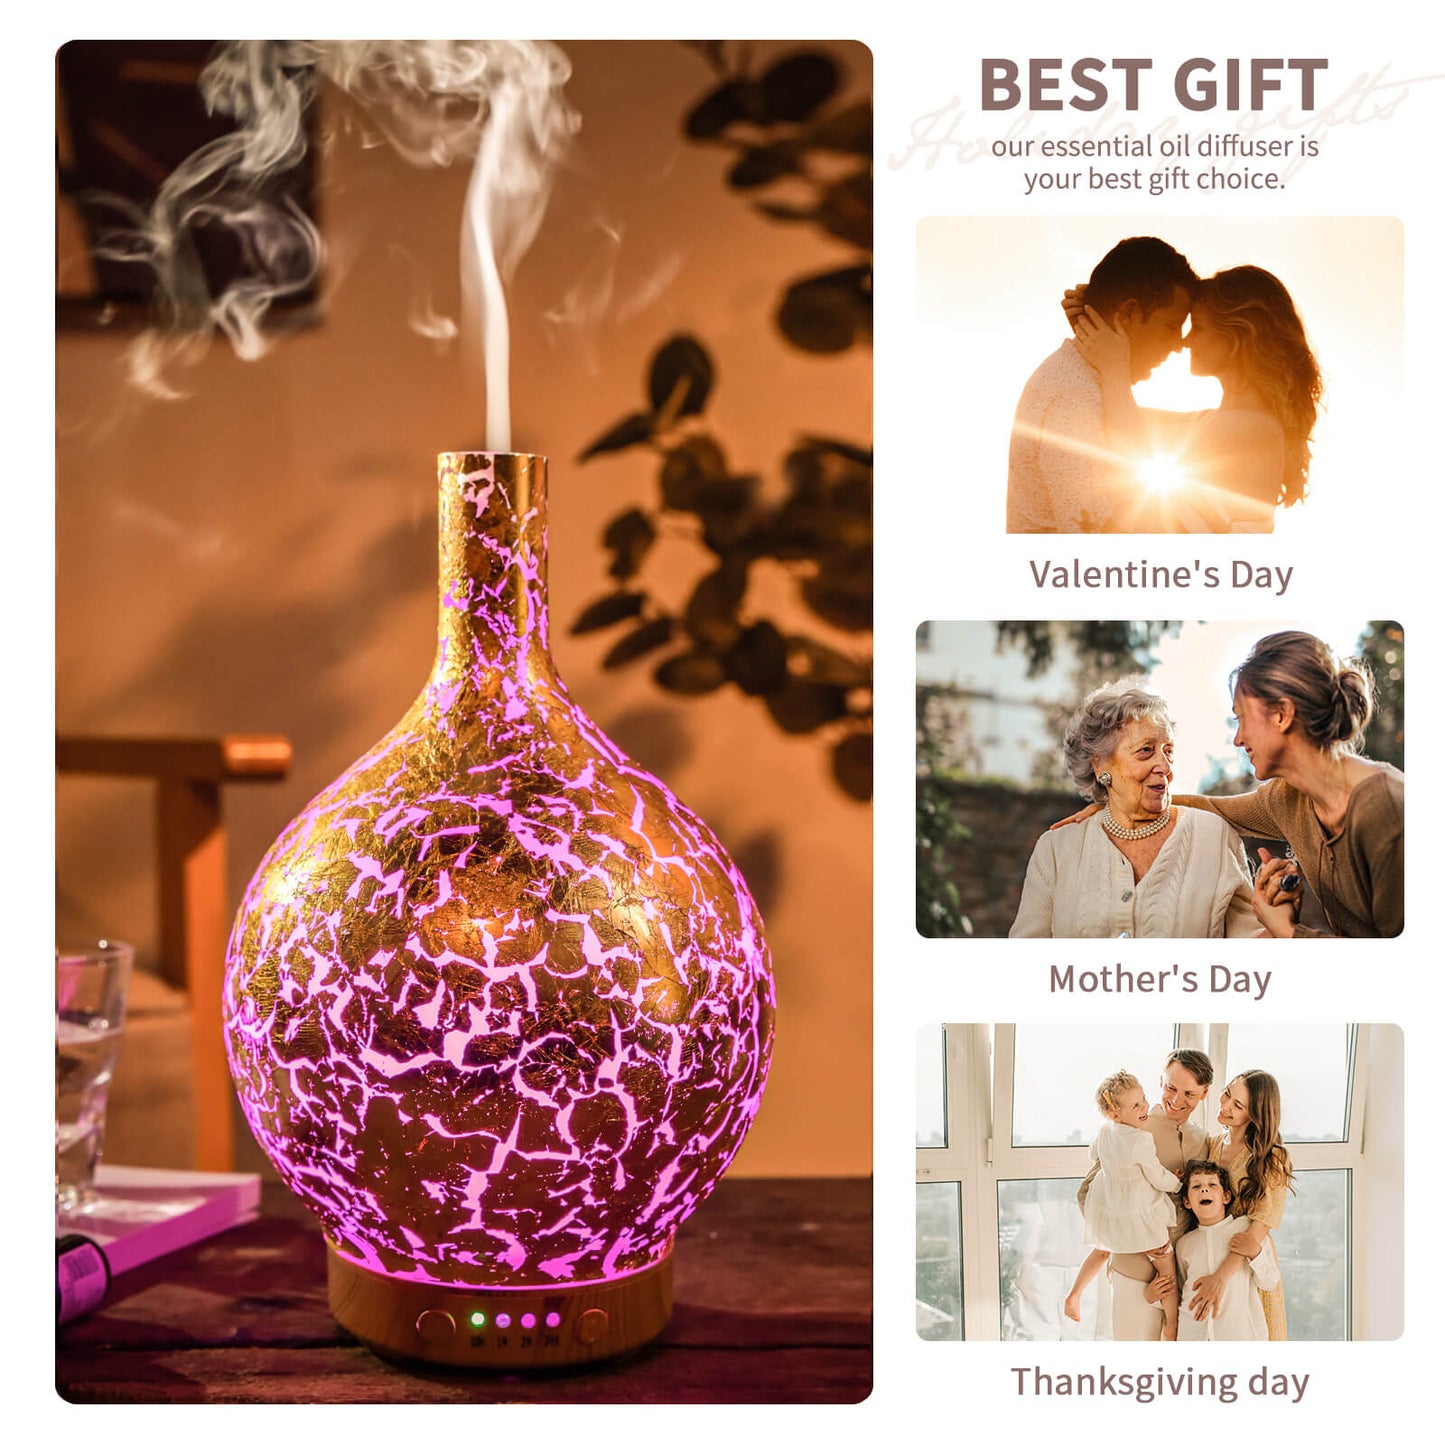 Porseme Gold Plated Essential Oil Diffuser Glass Aromatherapy Ultrasonic Humidifier, Auto Shut-Off,Timer Setting, BPA Free,Aroma Decoration for Home,Office,Gym,Spa,Premium Gift 100ml